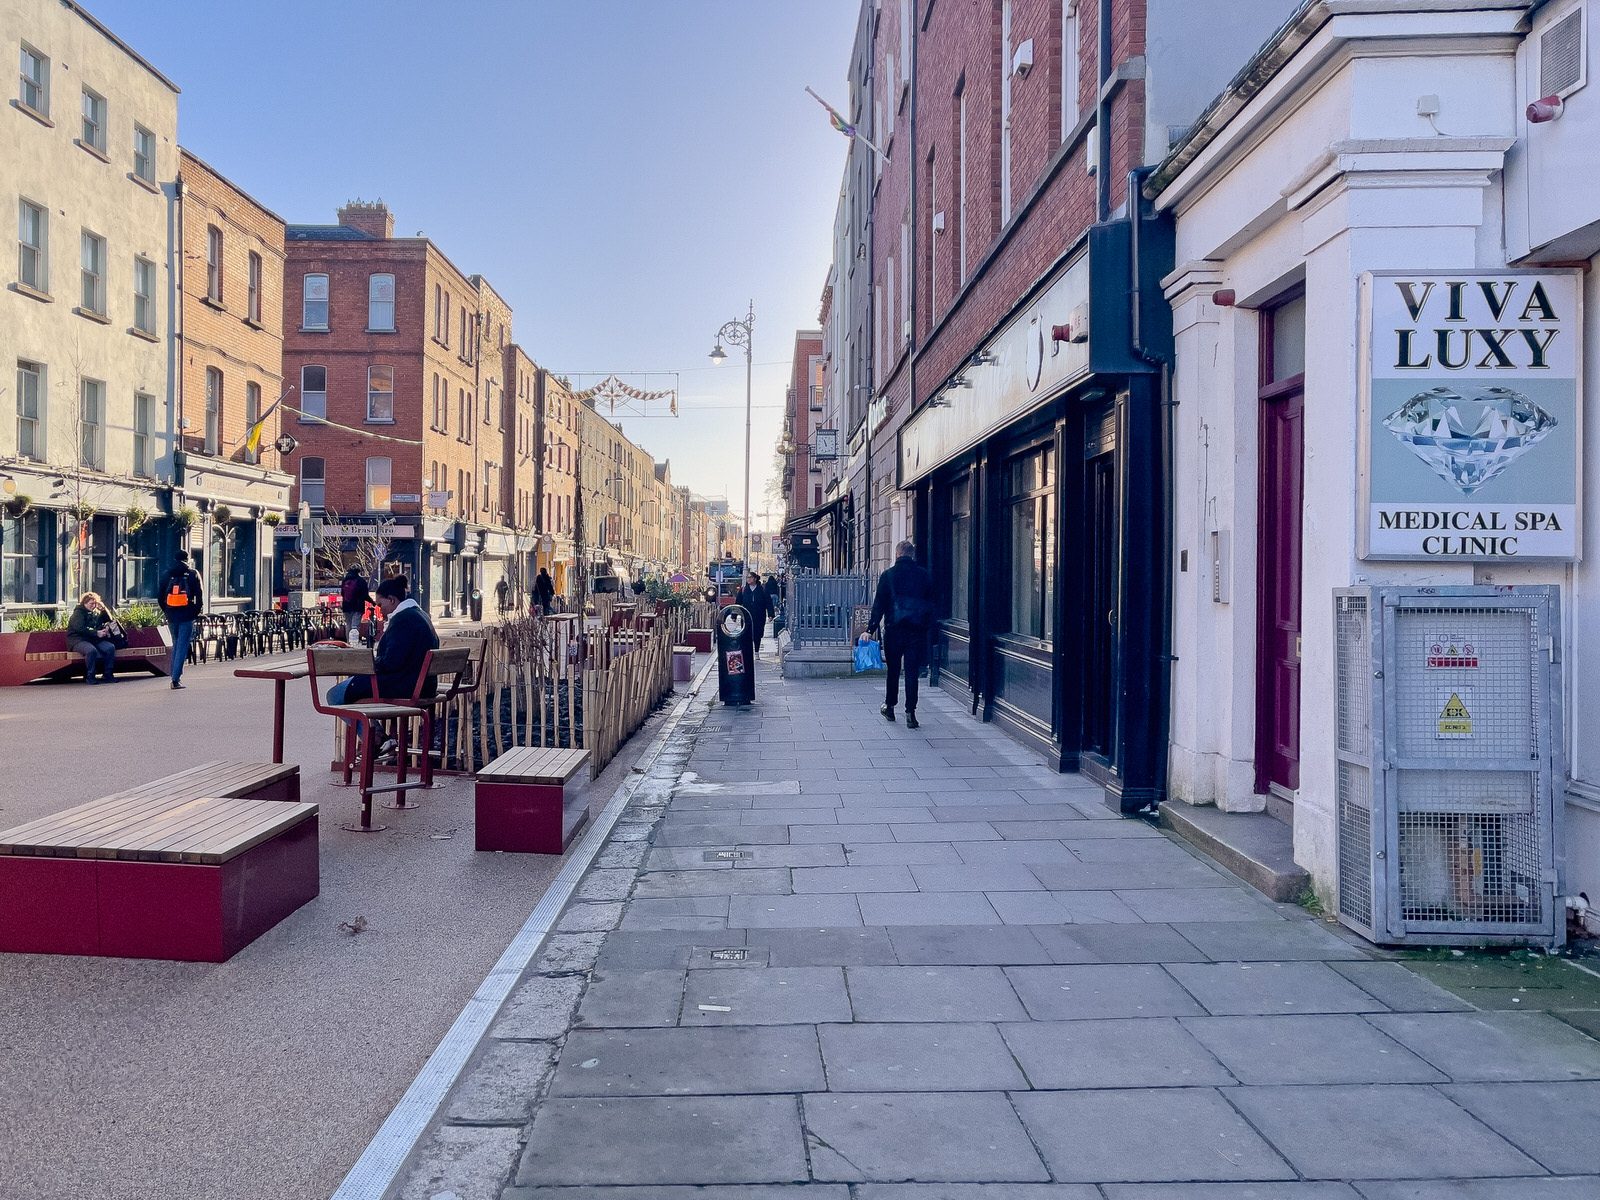 THE NEW STREET FURNITURE AND THE CHRISTMAS TREE [HAVE ARRIVED IN CAPEL STREET]-225844-1